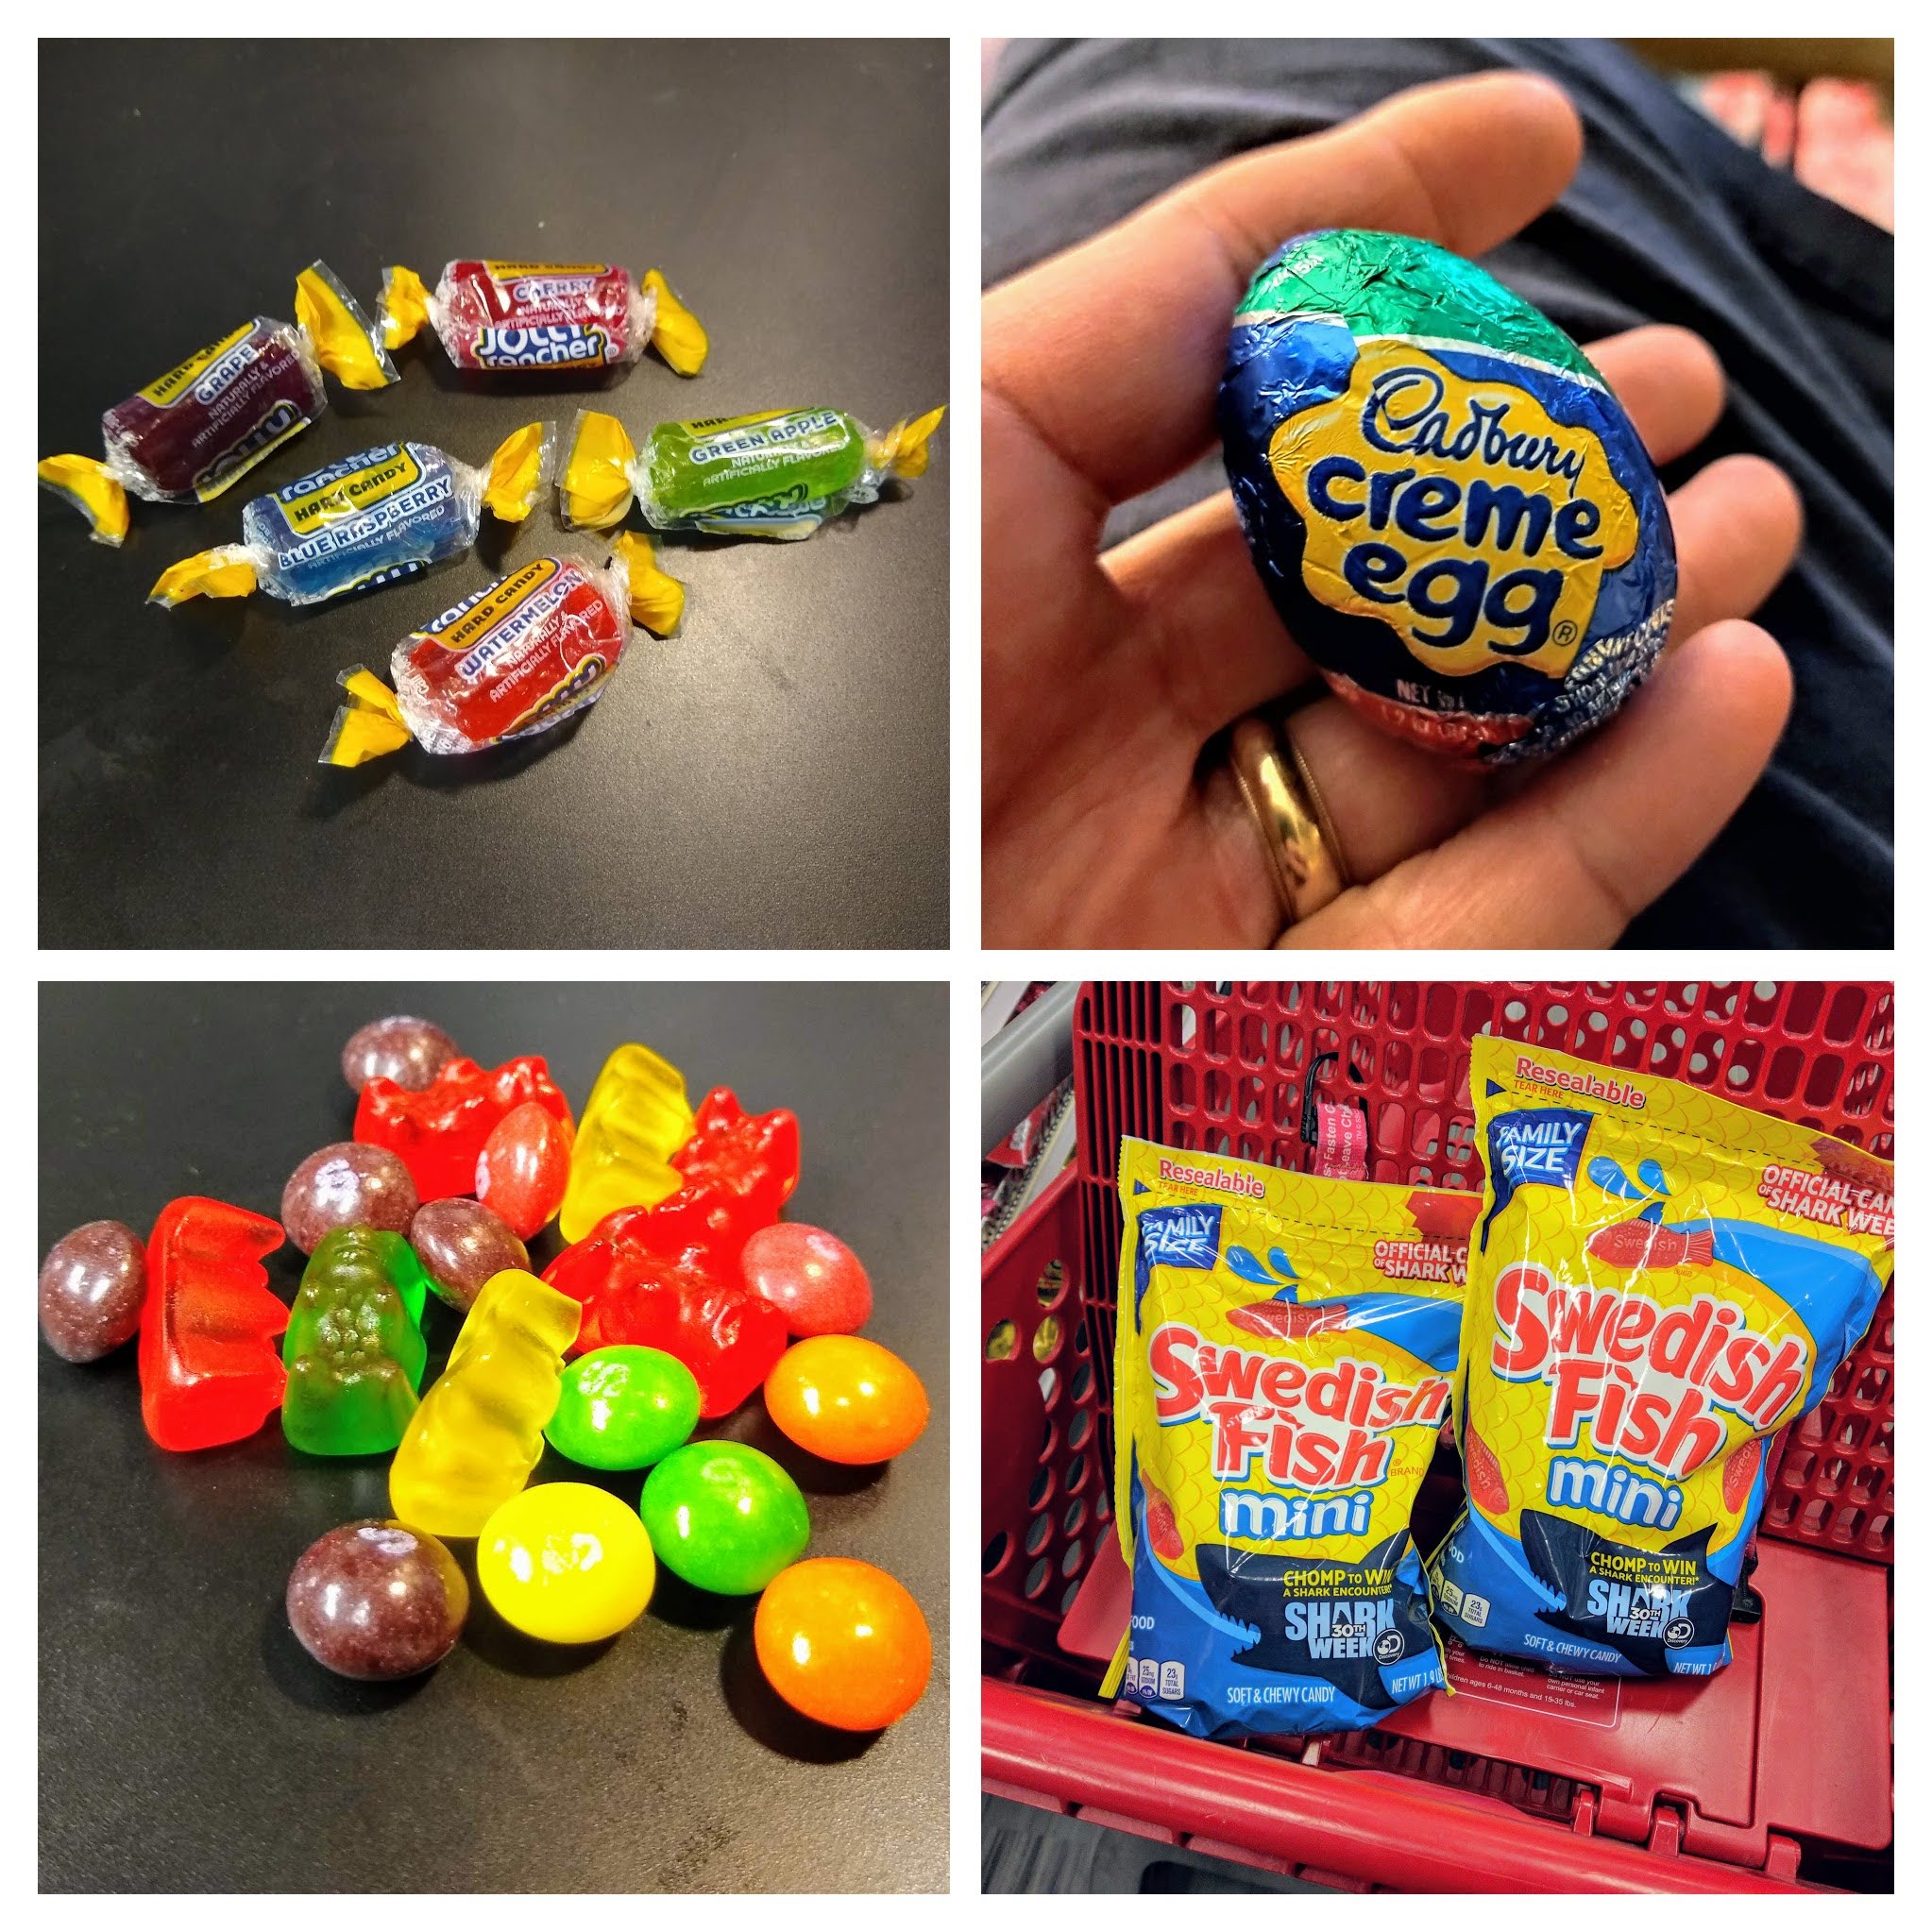 Tony’s Top 10 Favorite Candy